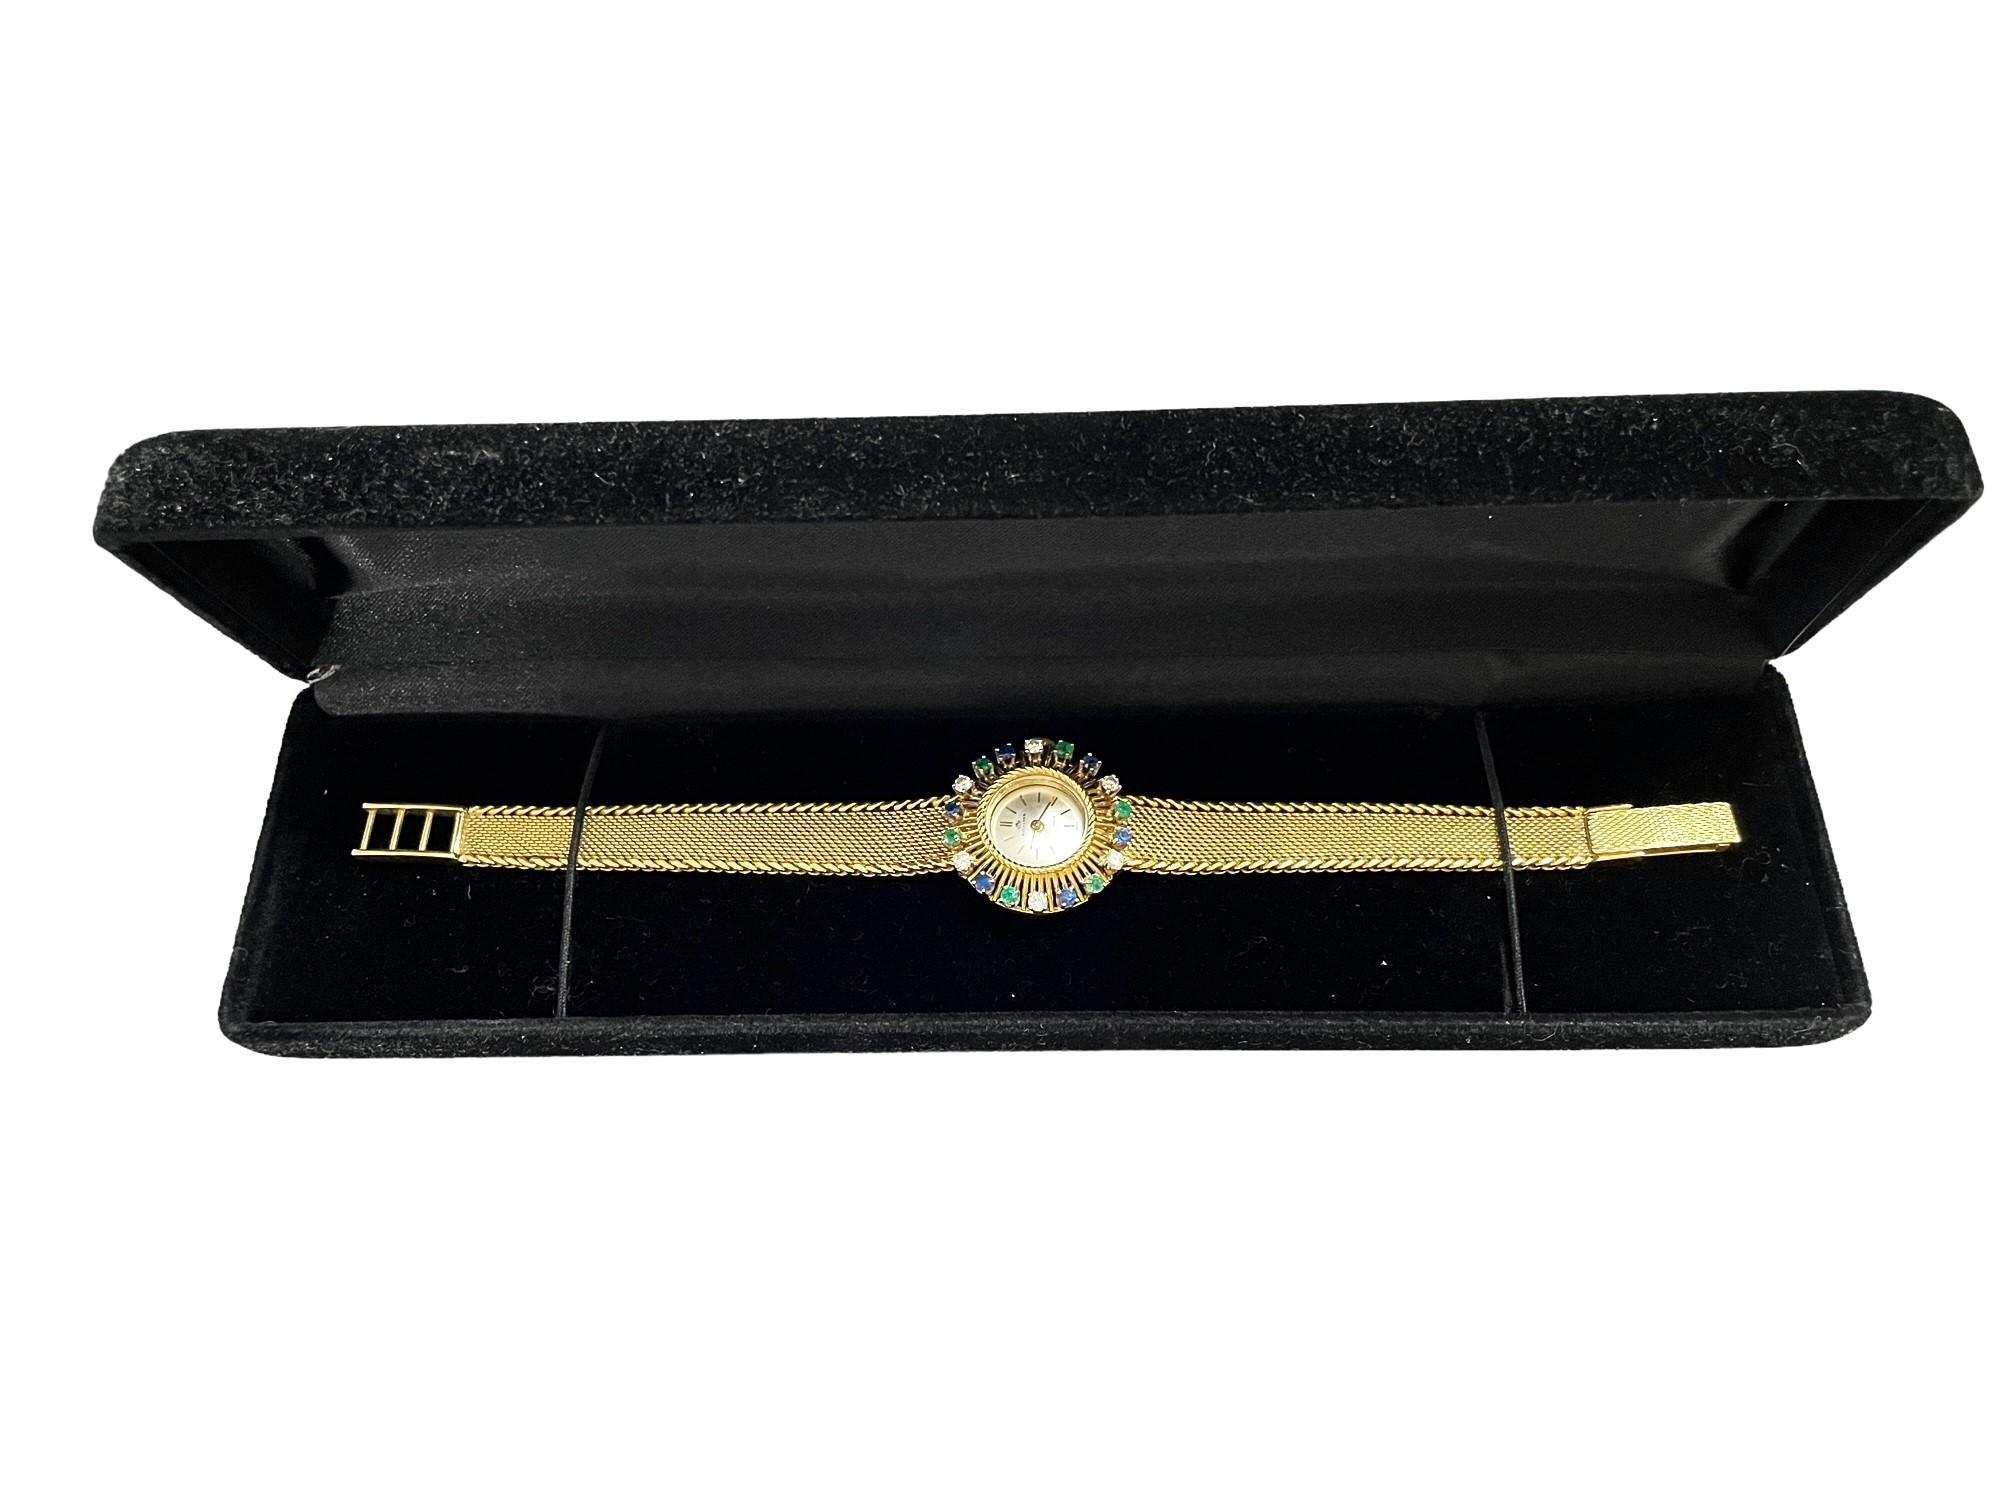 This is a stunning Woman's 18k Yellow Gold Swiss 17 Jewel Quartz (Battery Powered Watch.  Both the bracelet and the case are 18k Yellow Gold.  It is hallmarked 